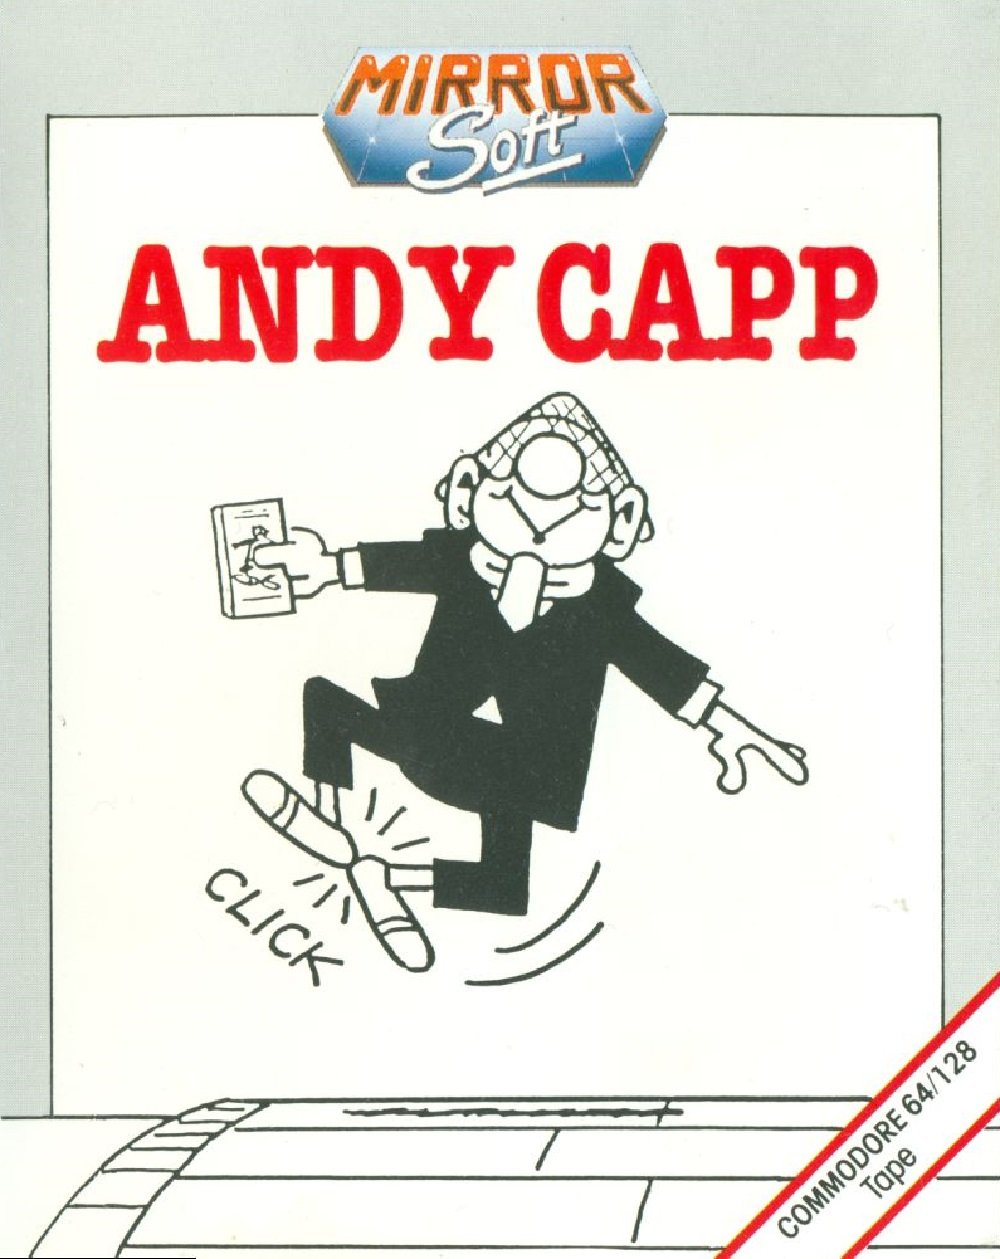 Image of Andy Capp